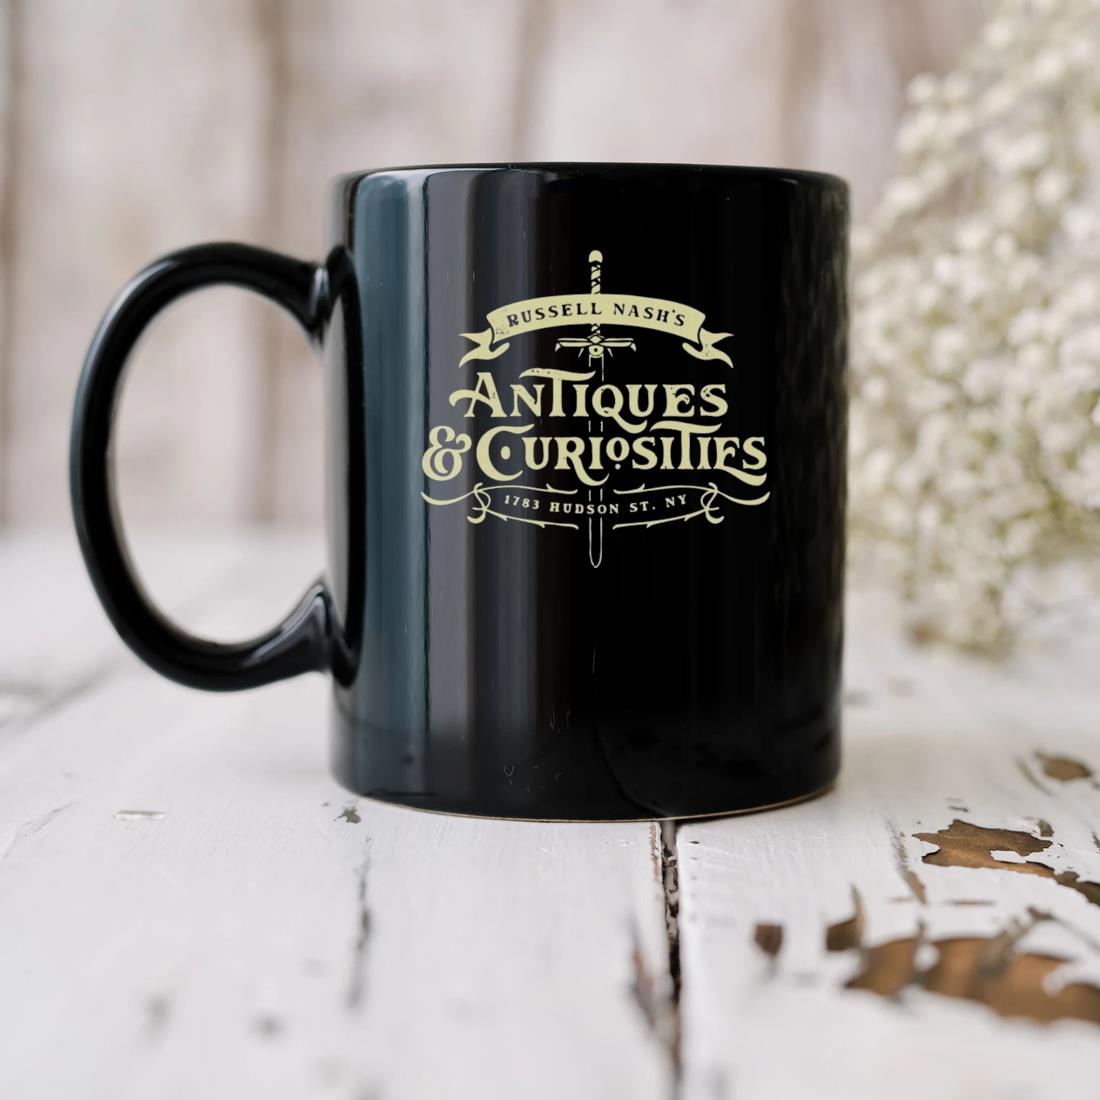 Russell Nash's Antiques And Curiosities Mug